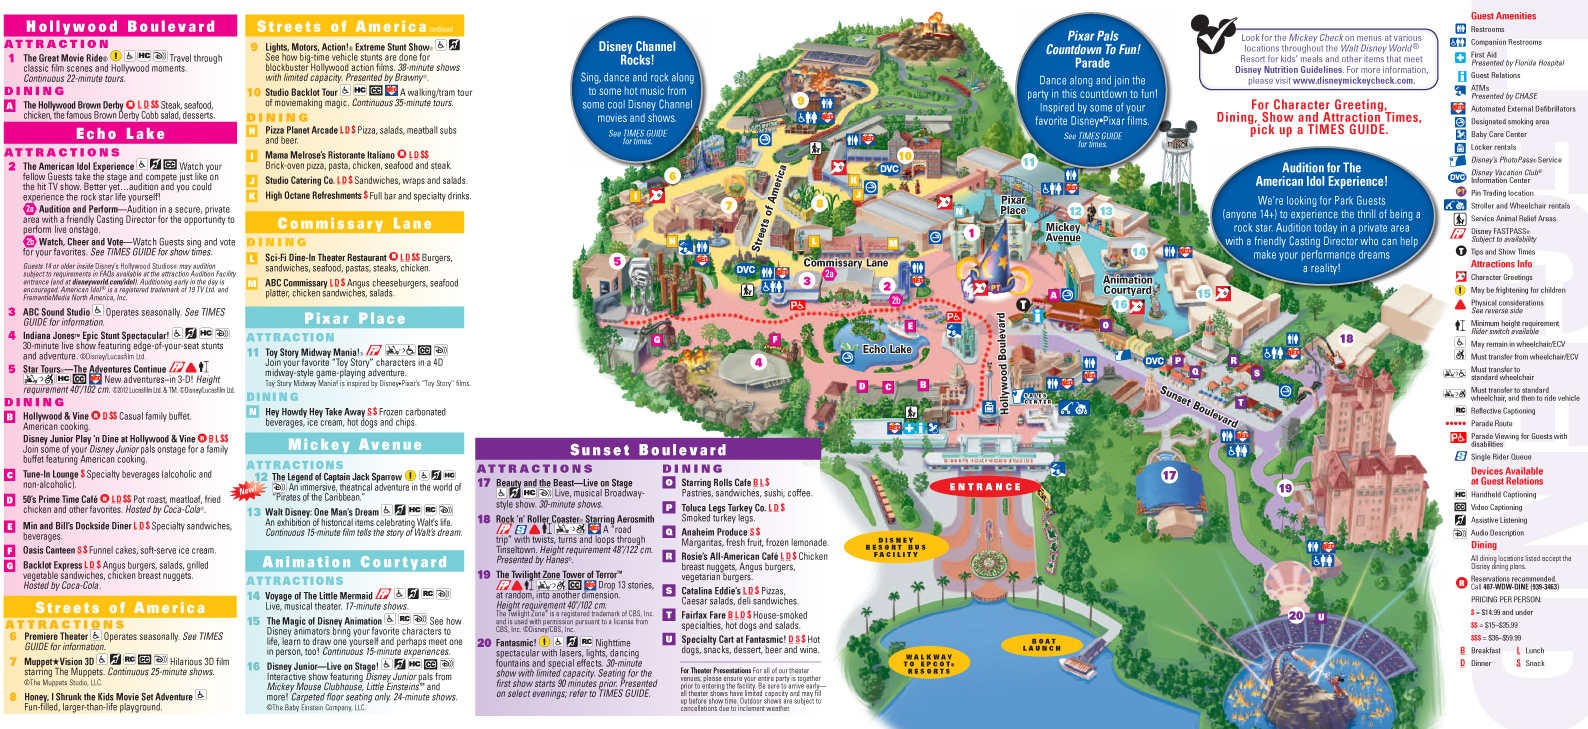 new-park-maps-released-today-include-my-disney-experience-details-and